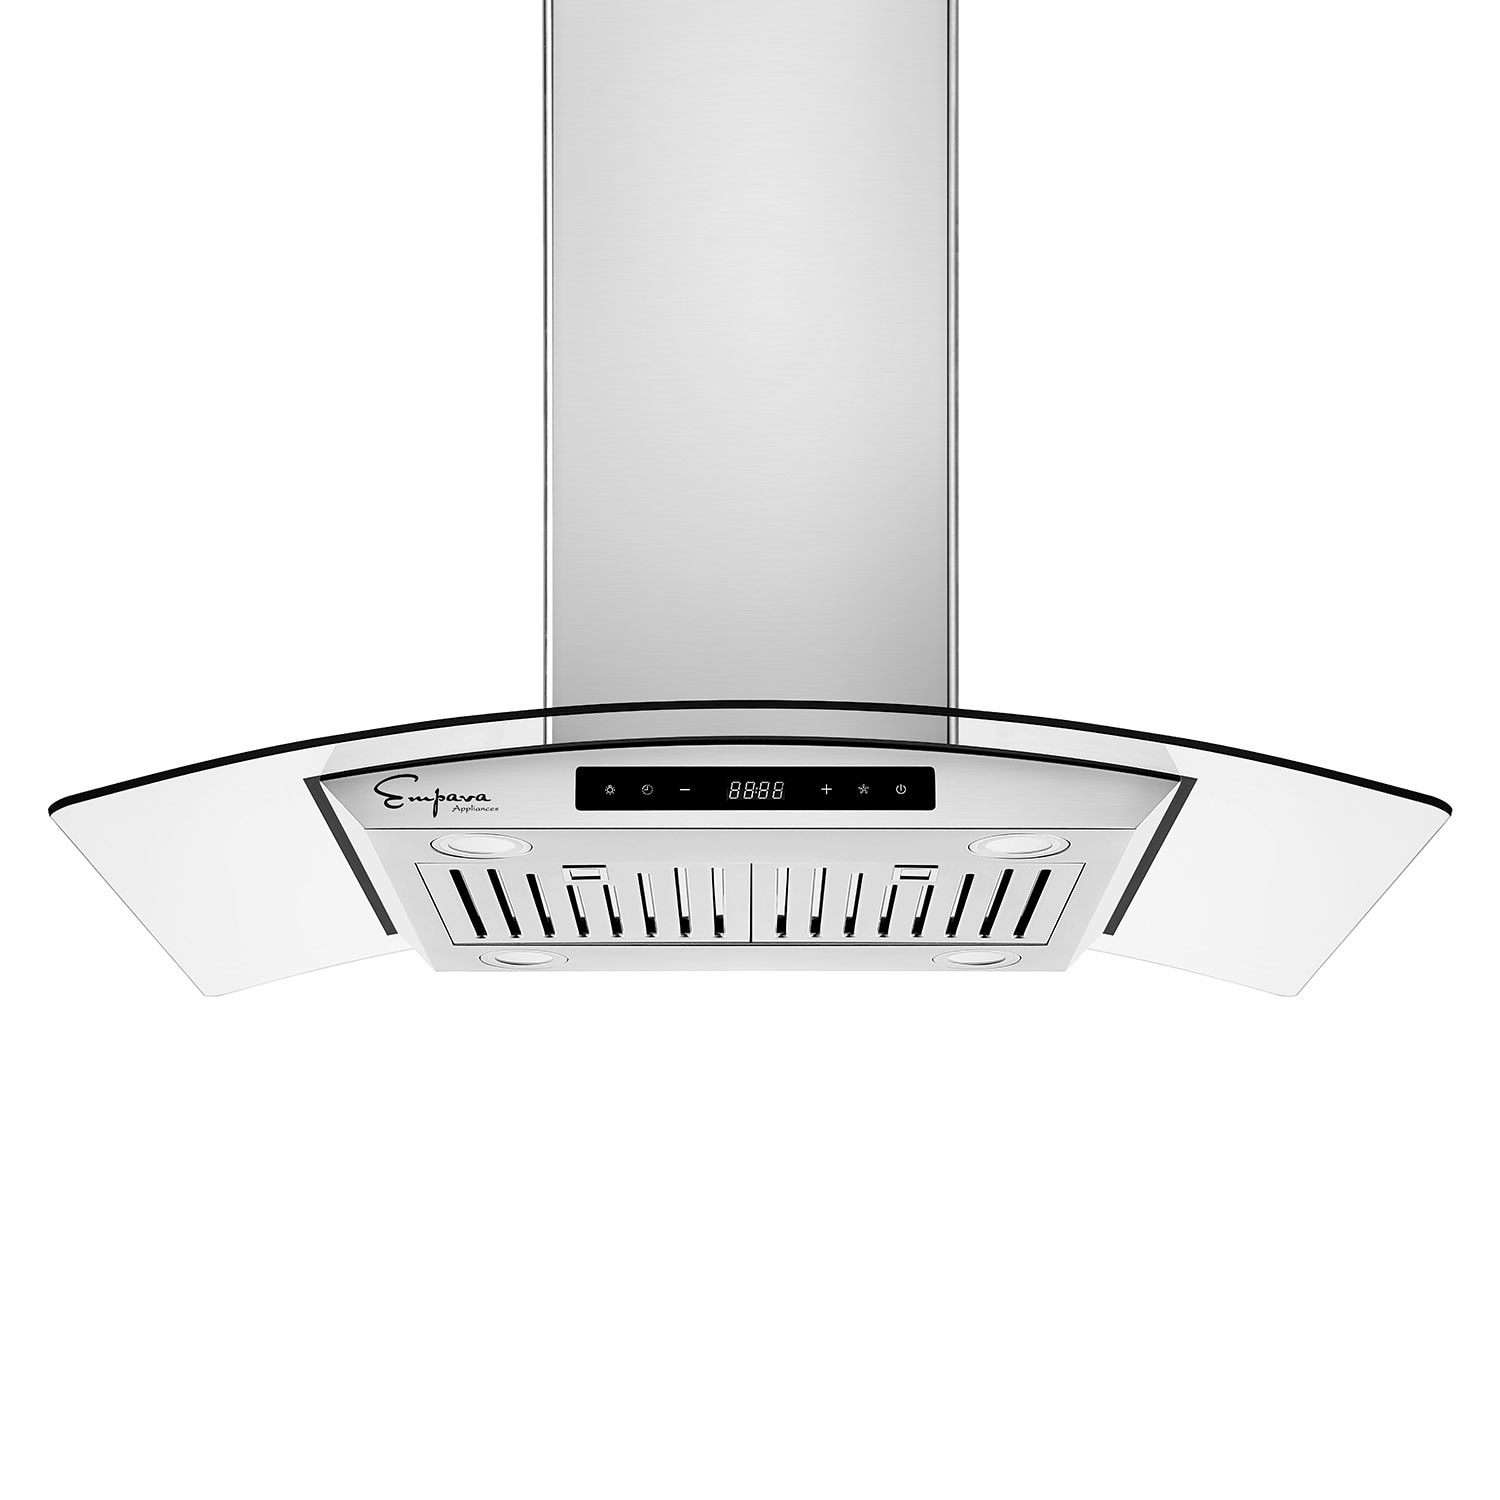 Empava 36" Ducted and Ductless Island Range Hood - Exhaust Kitchen Vent - Glass Cover - Dishwasher-Safe Stainless-Steel Filter